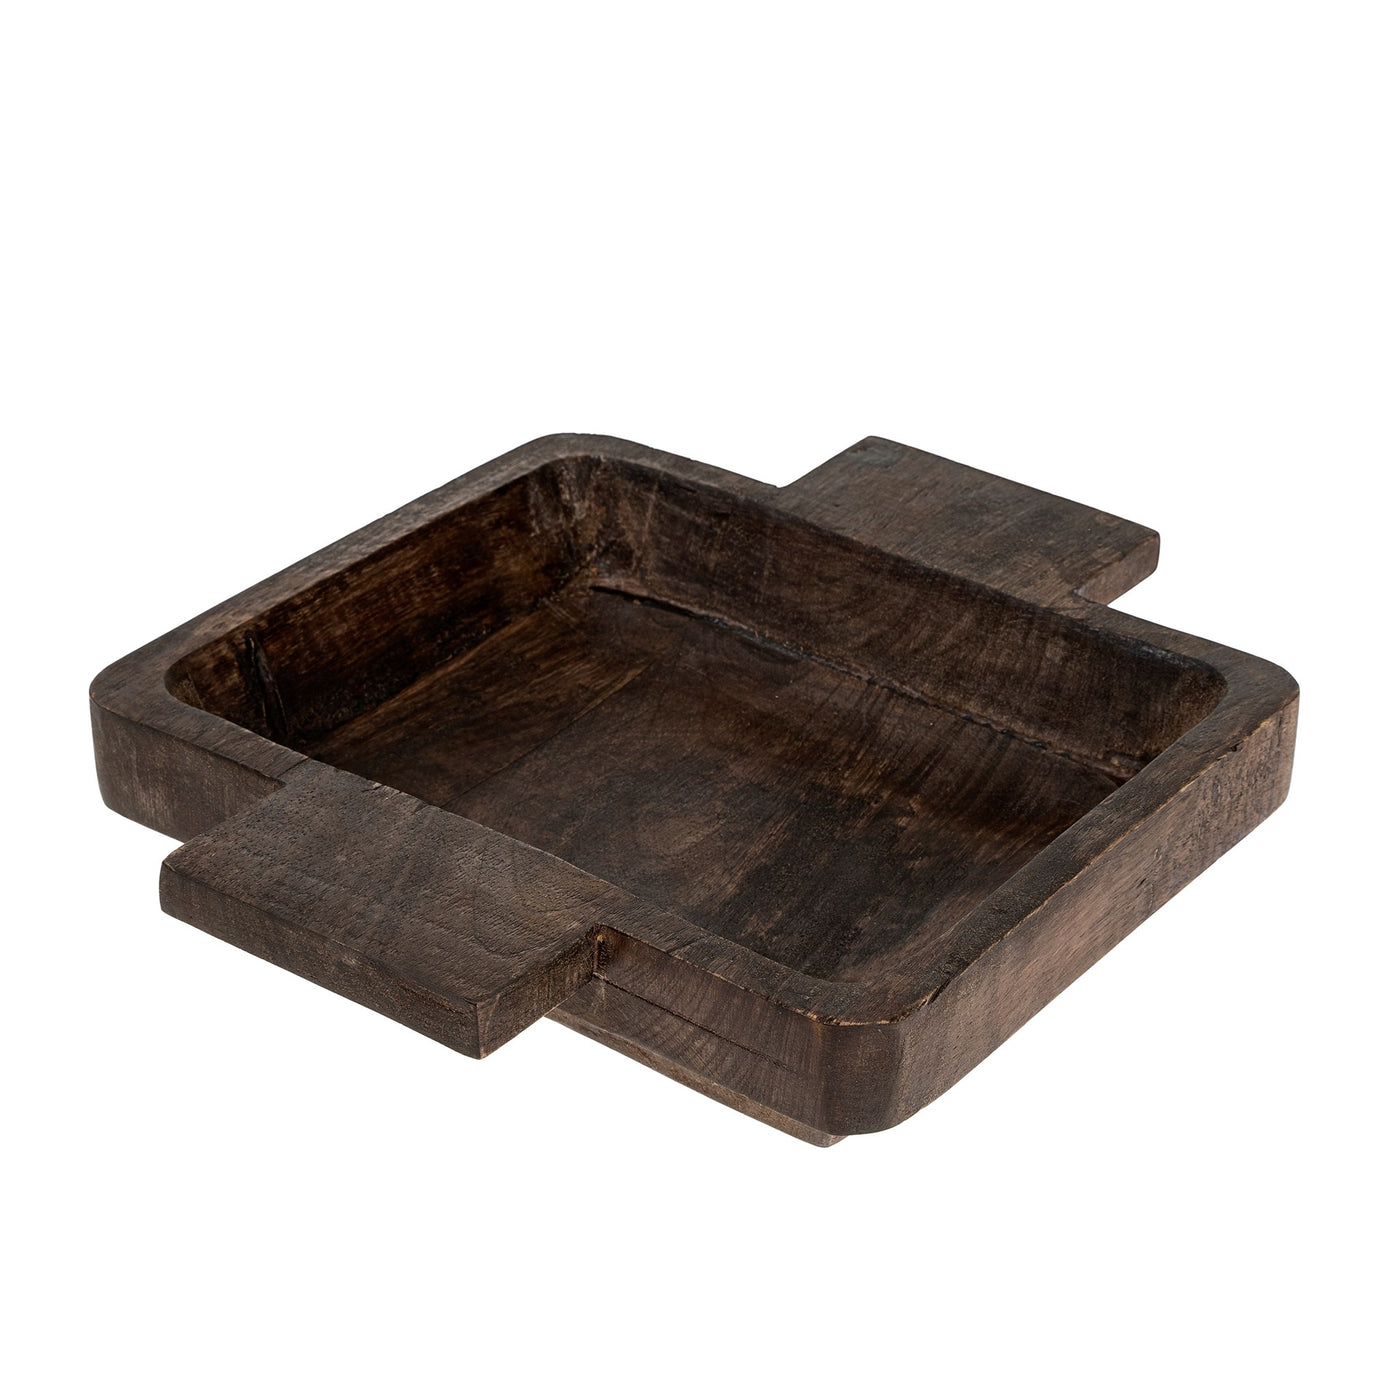 Burnt Brown Dough Bowl: can add rustic elegance to your home. Handcrafted from mango wood, it is food-safe & can be used as a styling piece in any space.